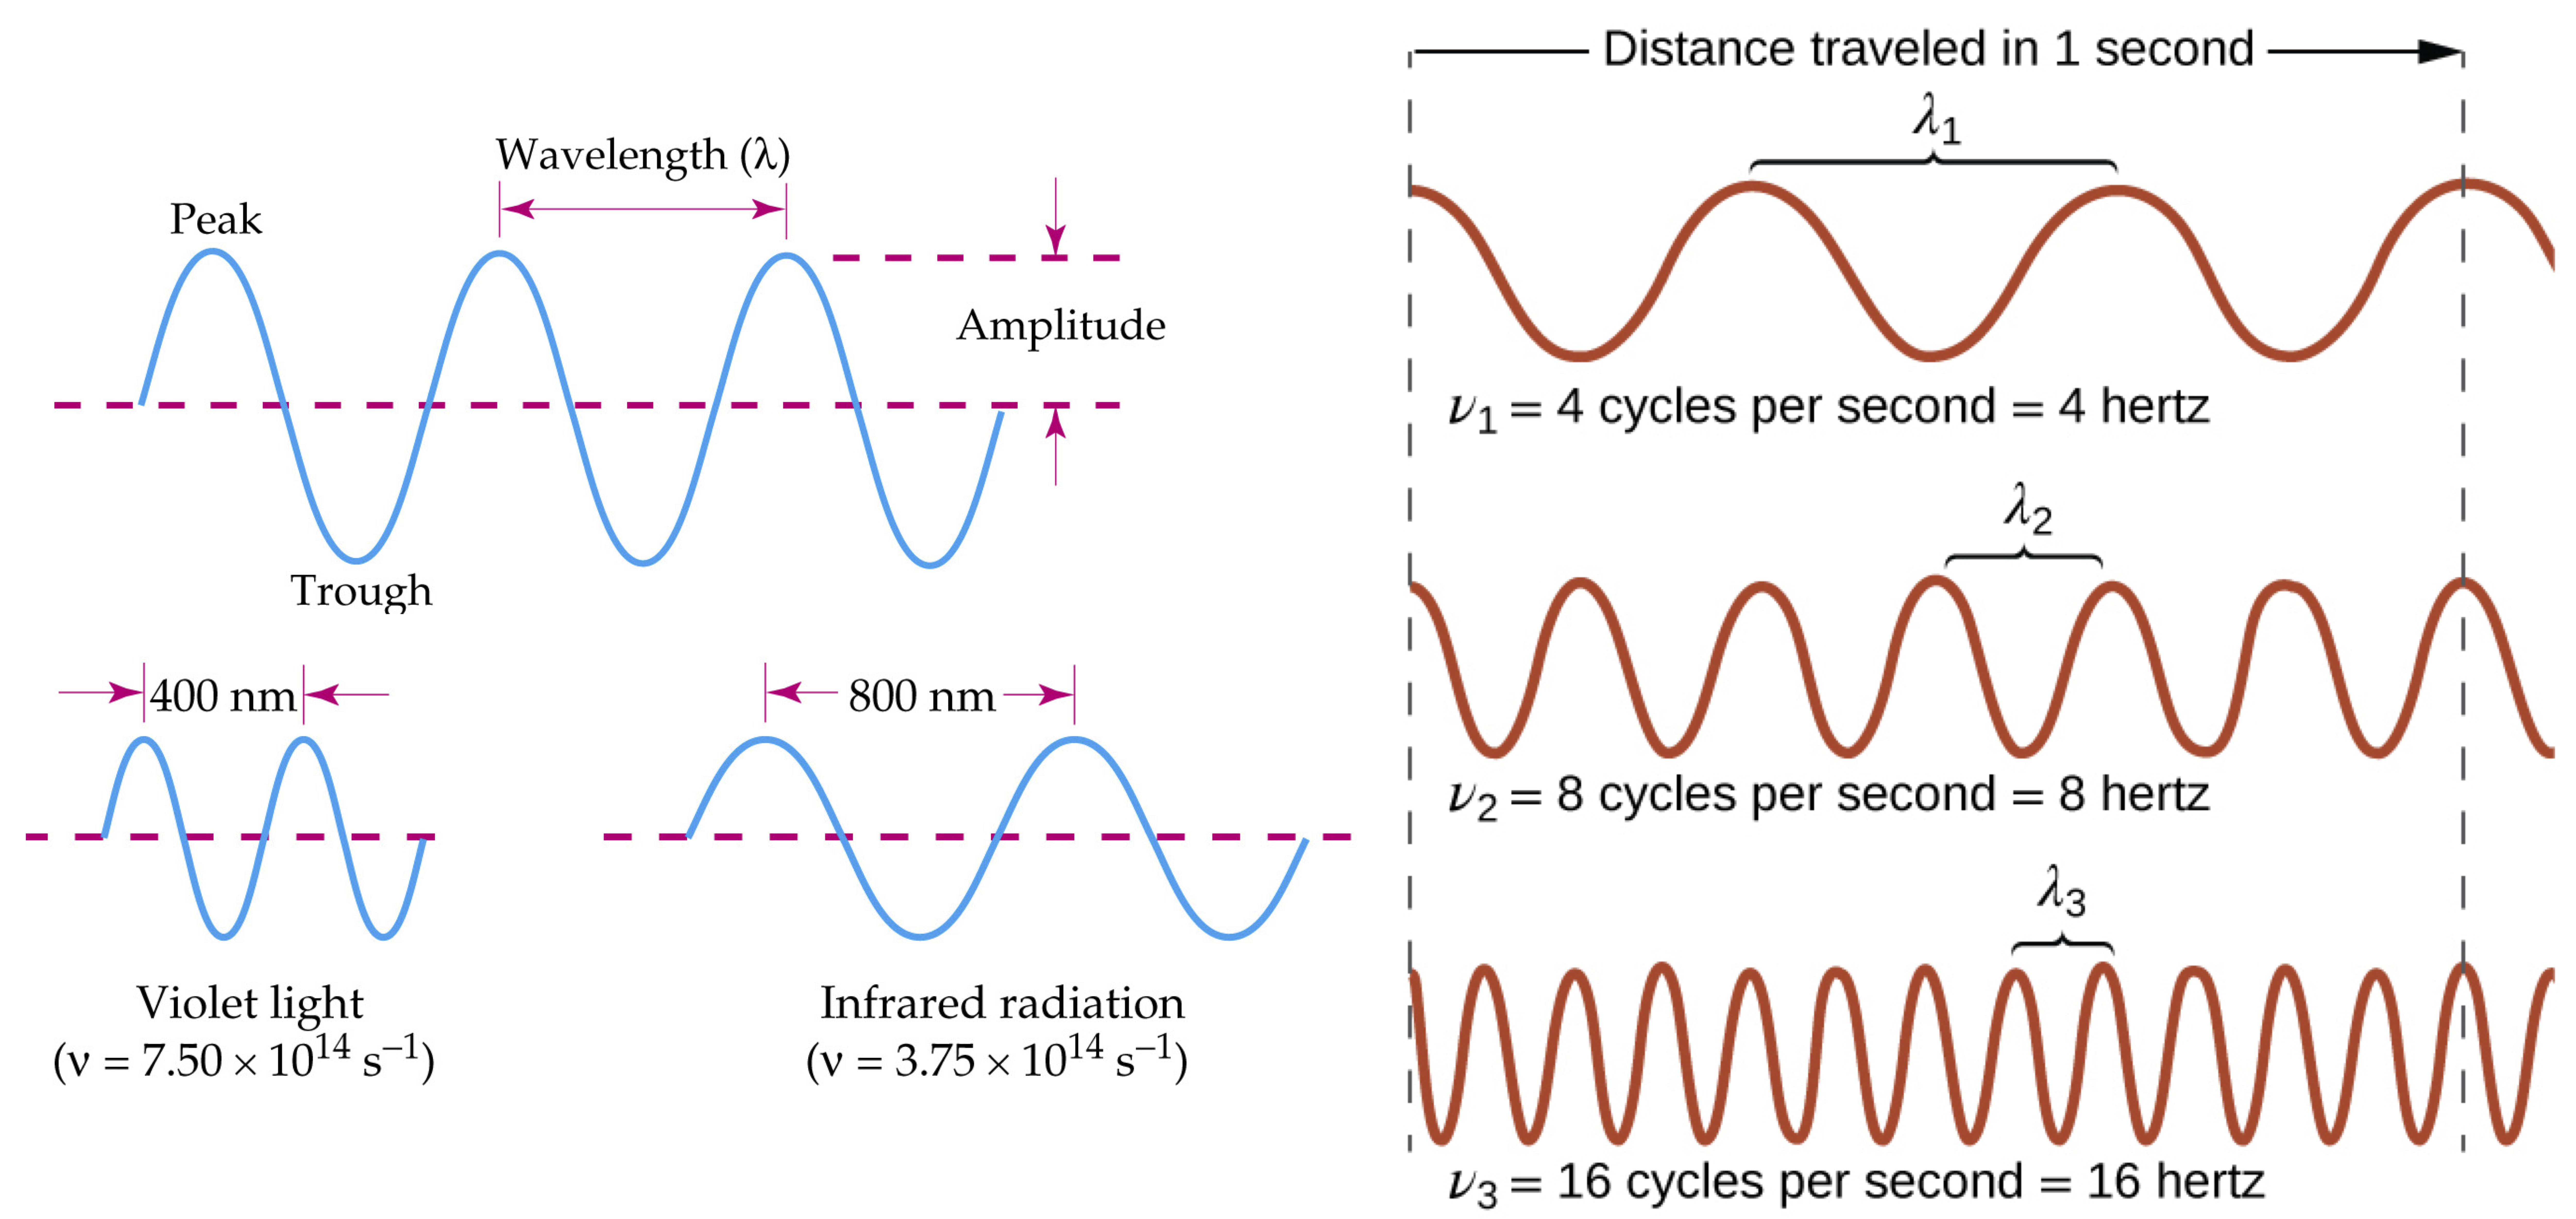 Definitions of wavelength  and frequency .